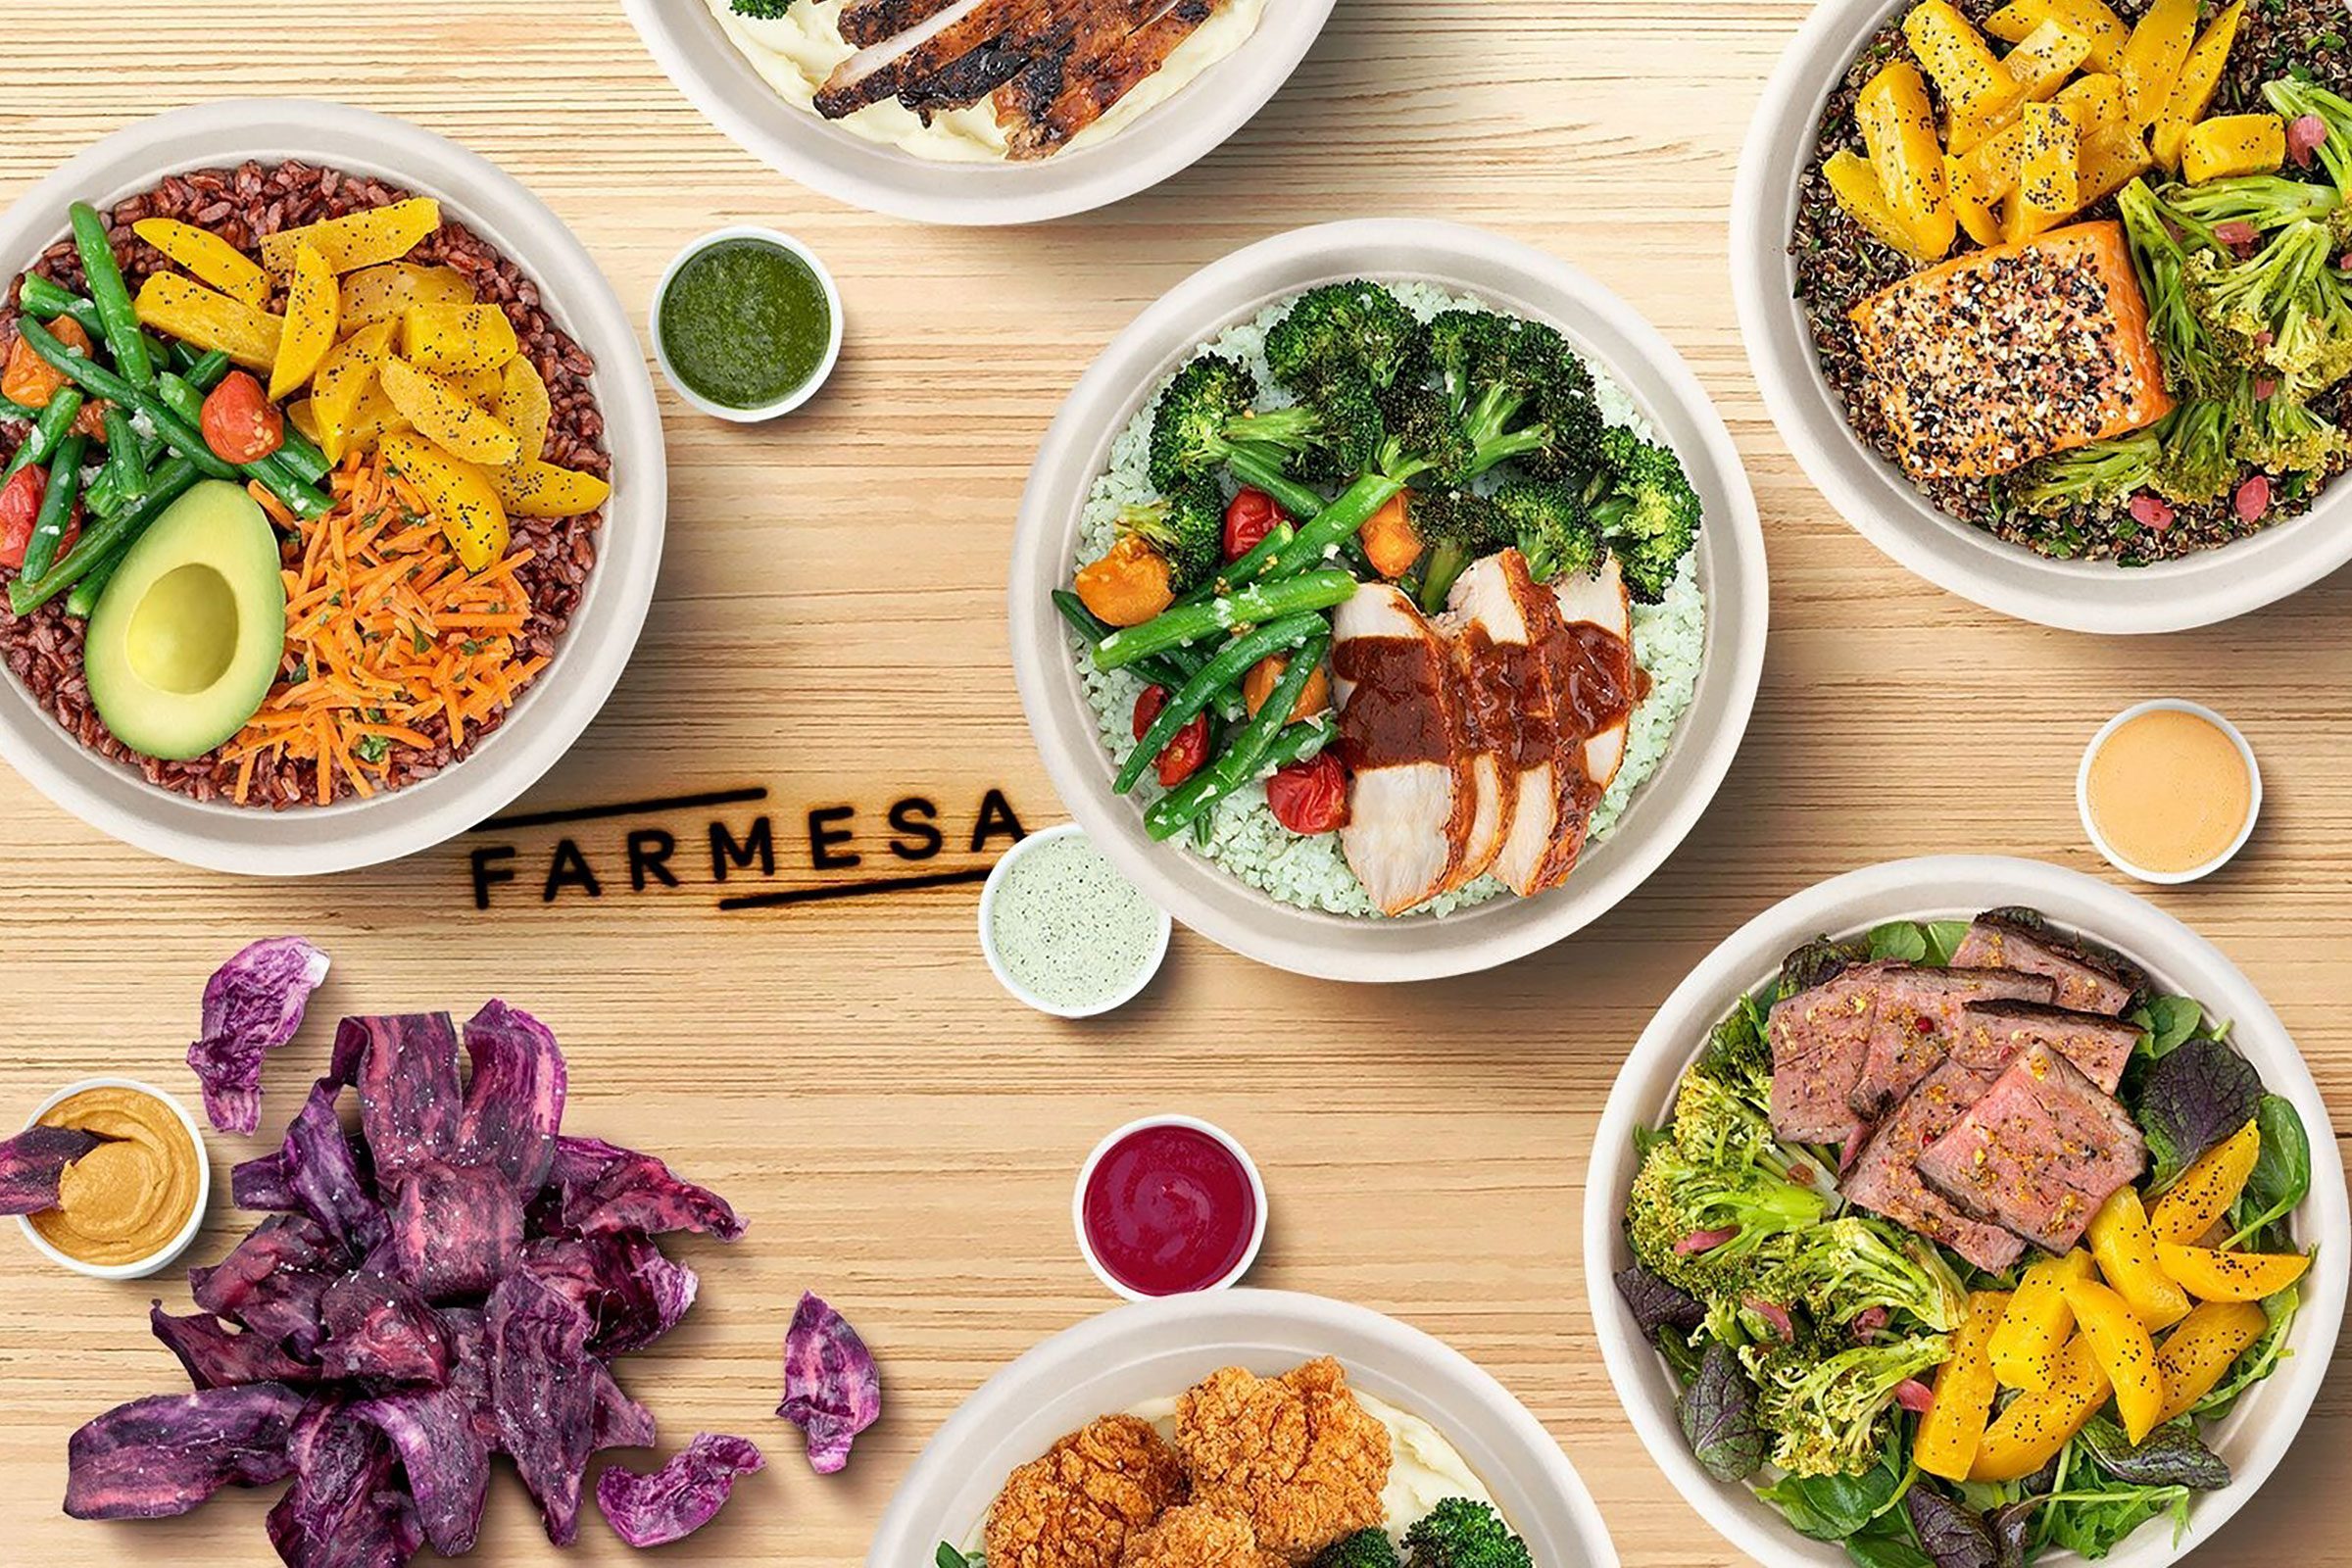 Chipotle Is Opening Up a New Spinoff Restaurant—Here’s Everything We Know So Far thumbnail